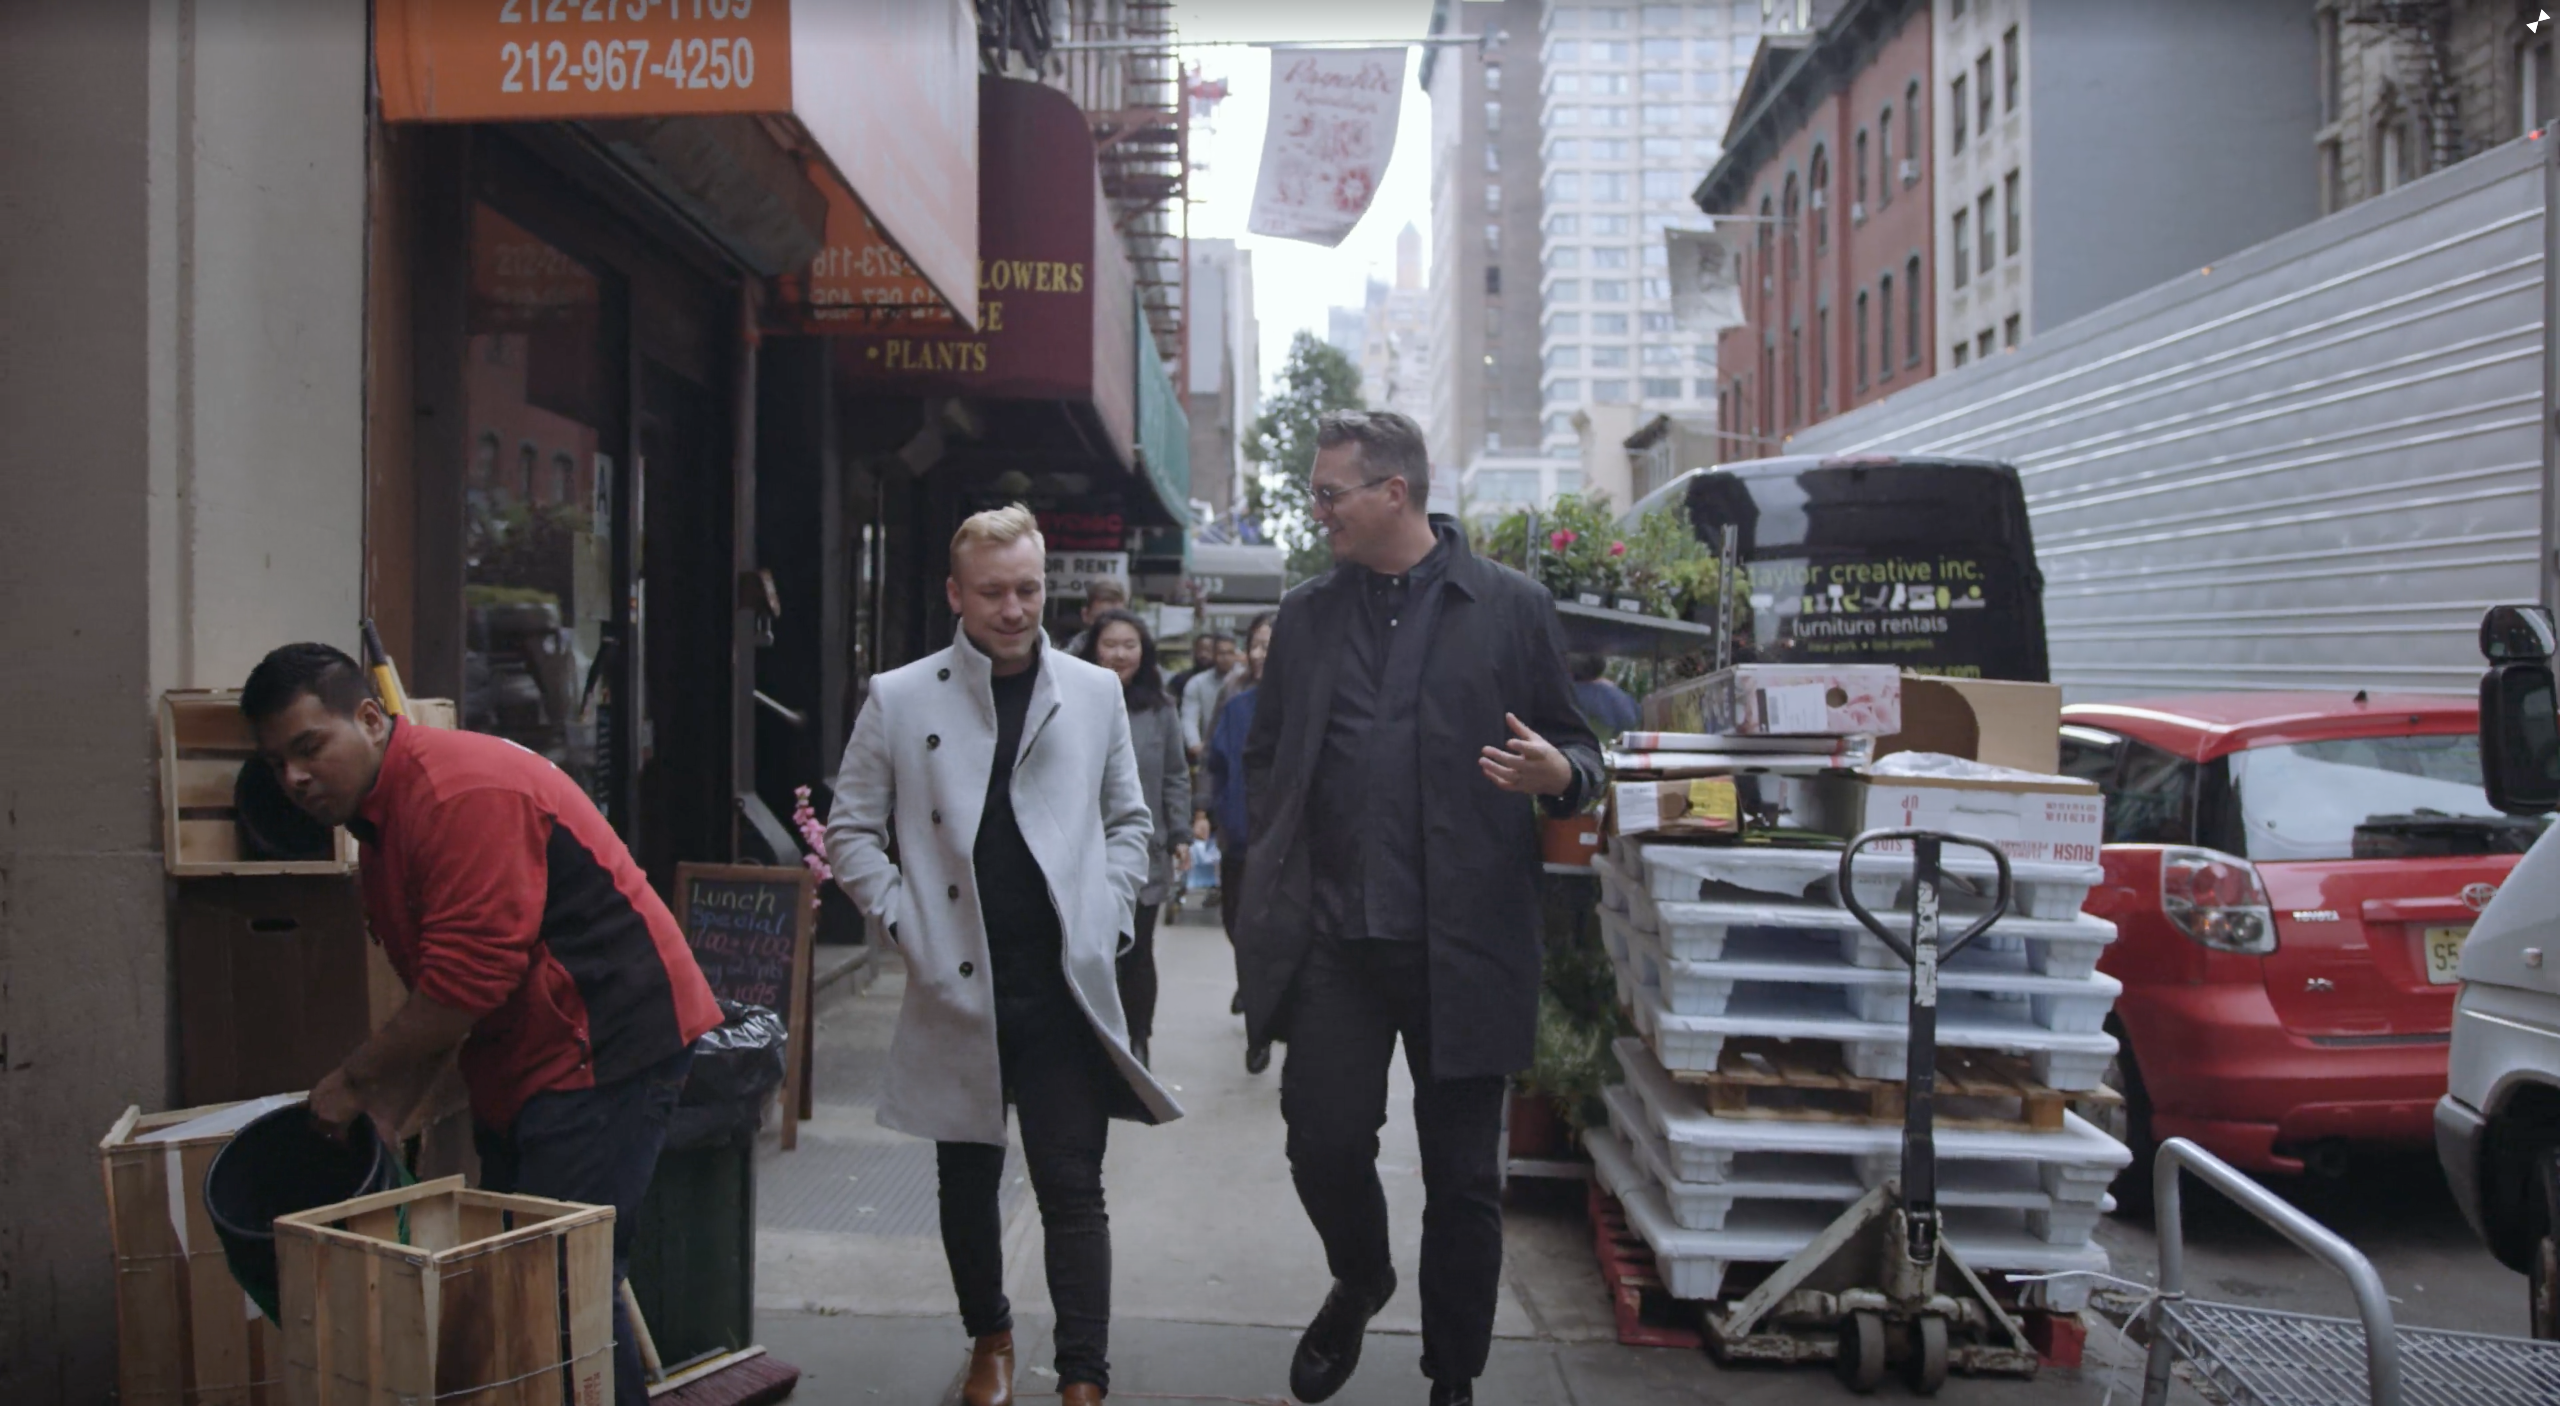 EDSA Design Studio NYC with two men walking down a street talking with cars parked nearby